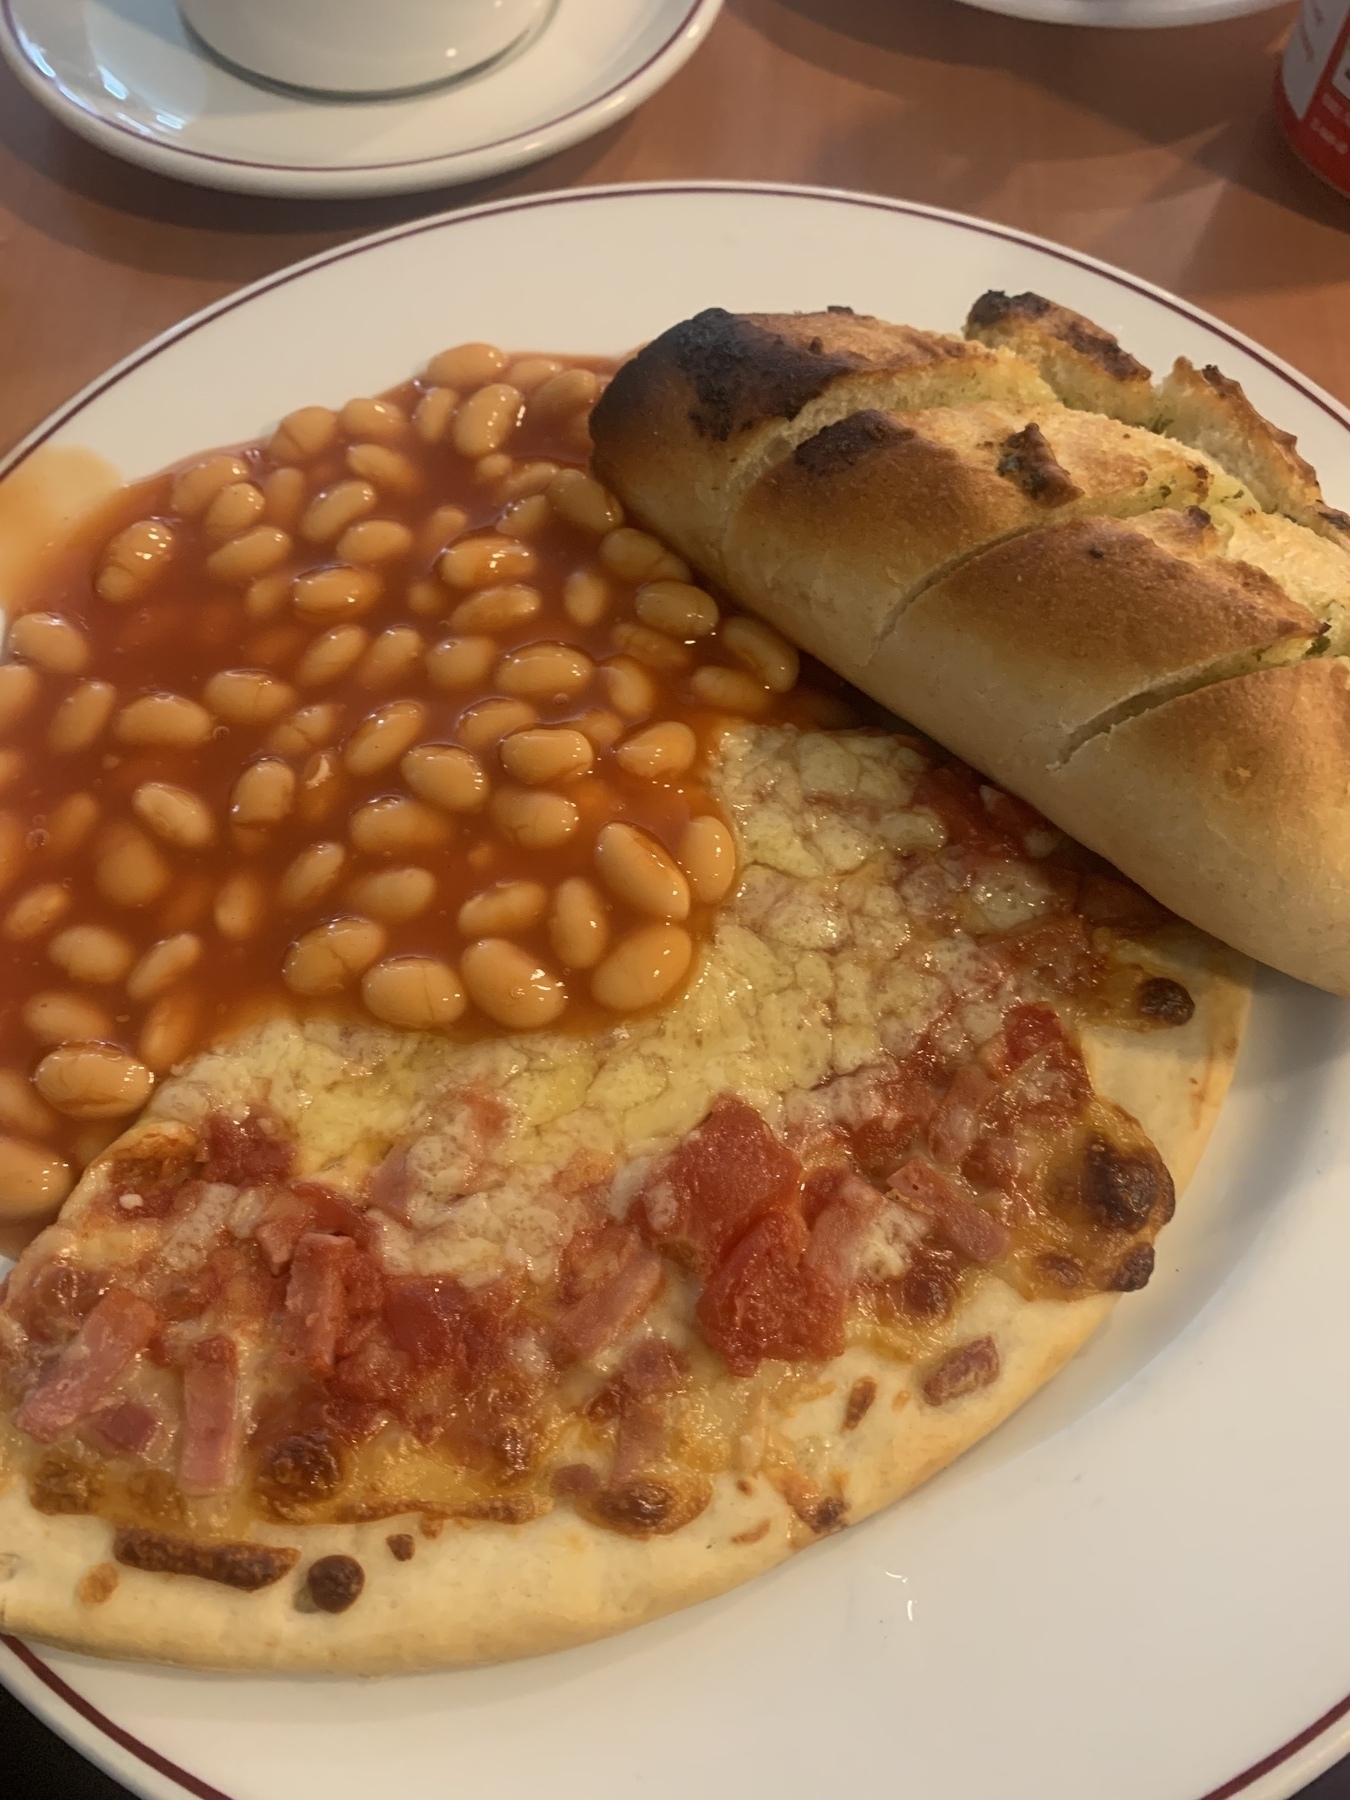 White china plate filled with a huge slice of pizza, half a garlic bread baguette and a mound of baked beans.